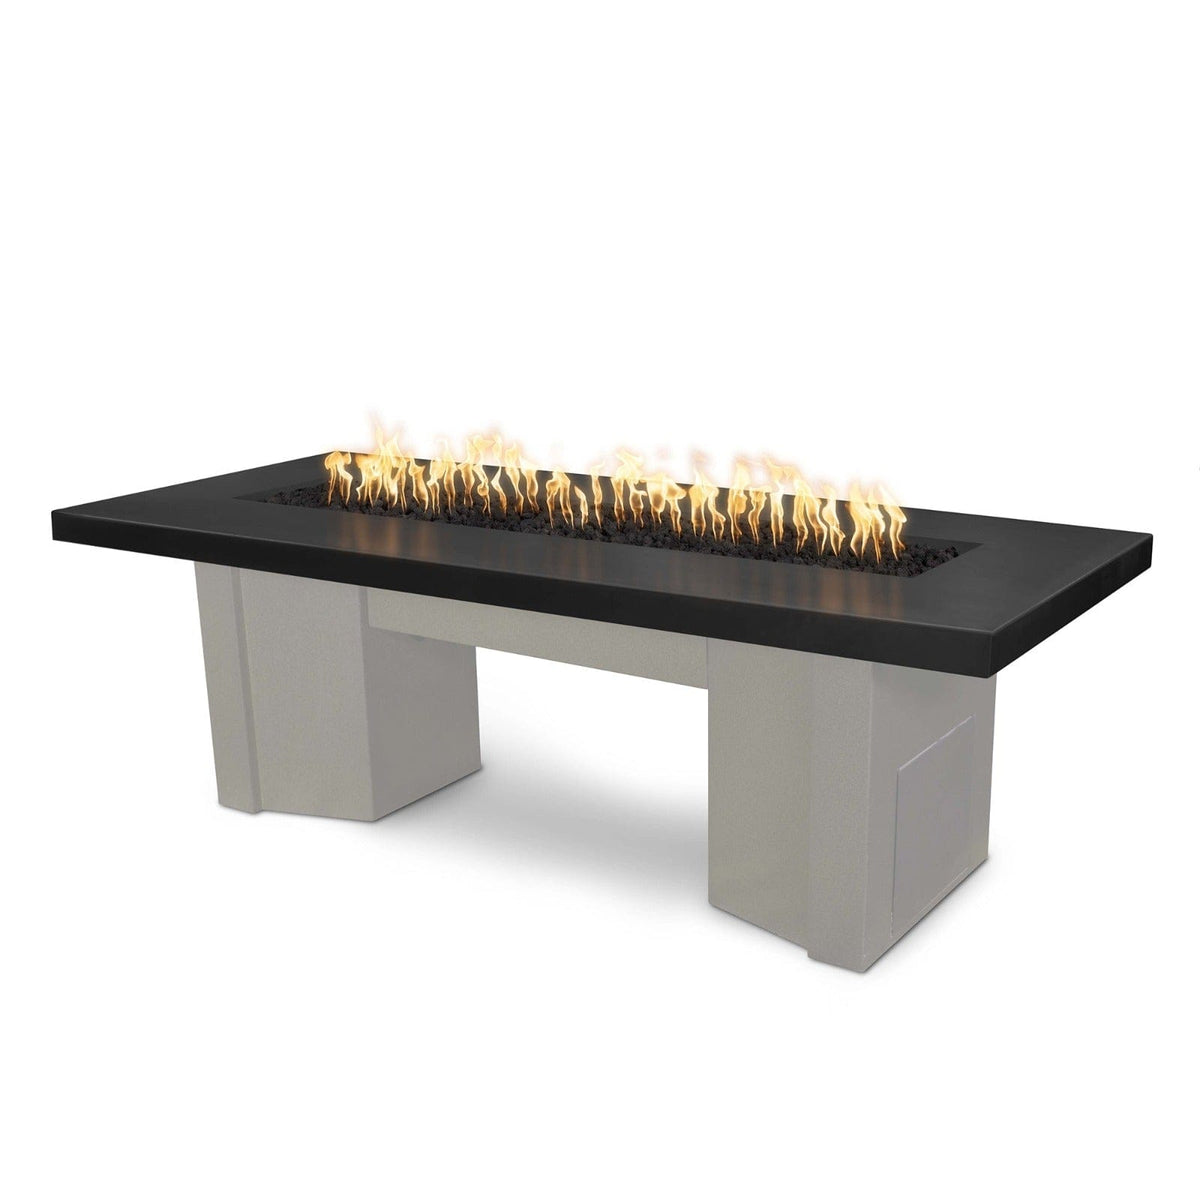 The Outdoor Plus Fire Features Black (-BLK) / Pewter Powder Coated Steel (-PEW) The Outdoor Plus 78&quot; Alameda Fire Table Smooth Concrete in Liquid Propane - Flame Sense System with Push Button Spark Igniter / OPT-ALMGFRC78FSEN-LP